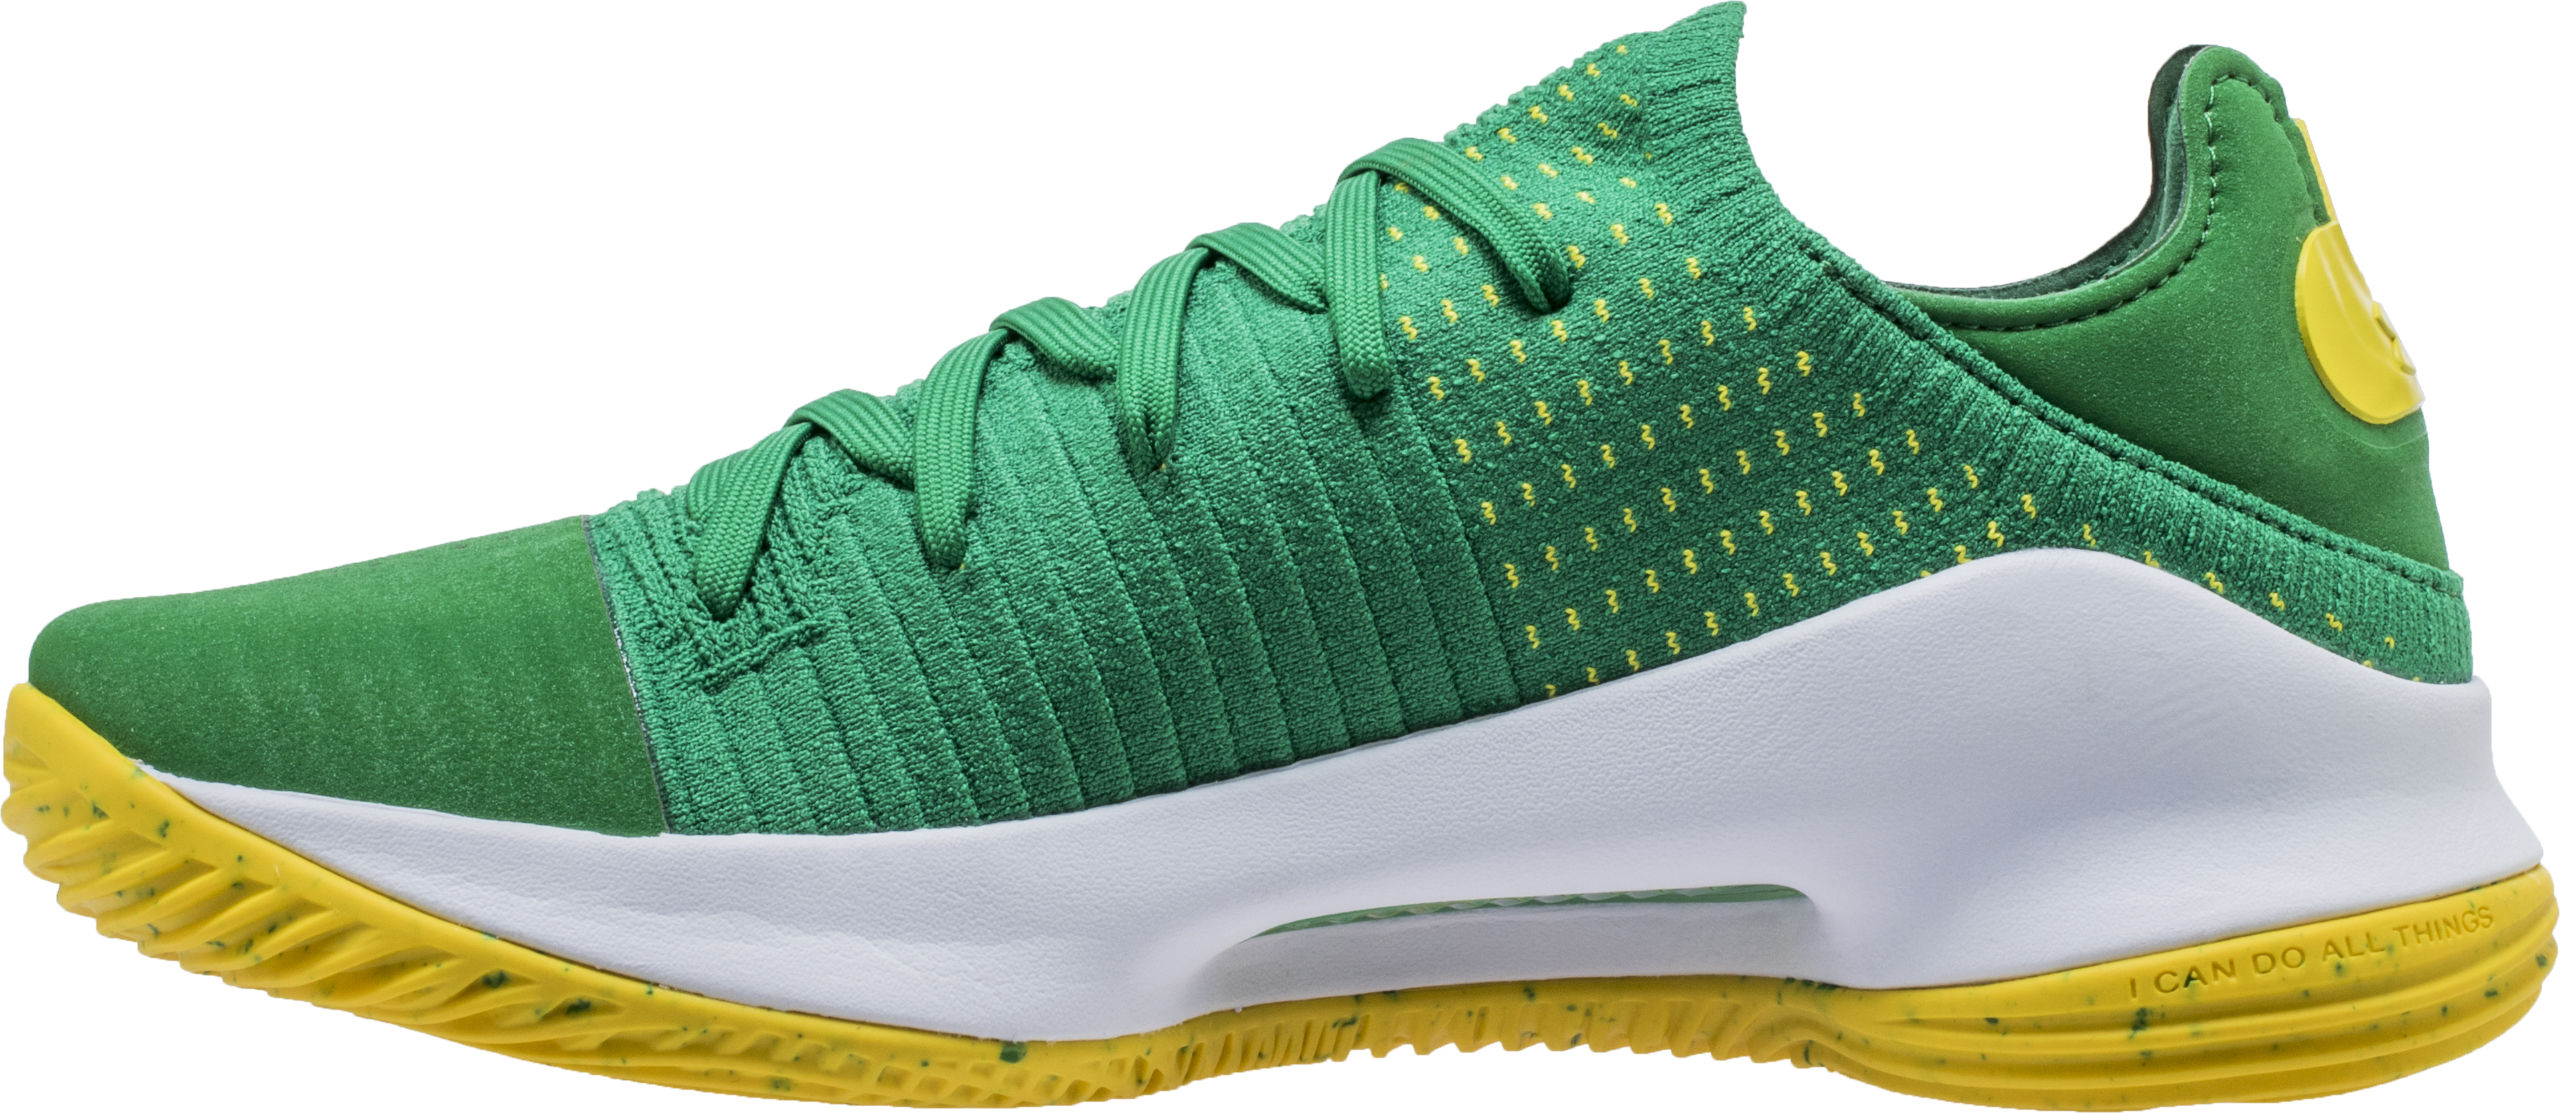 under armour curry 4 low oakland As 1